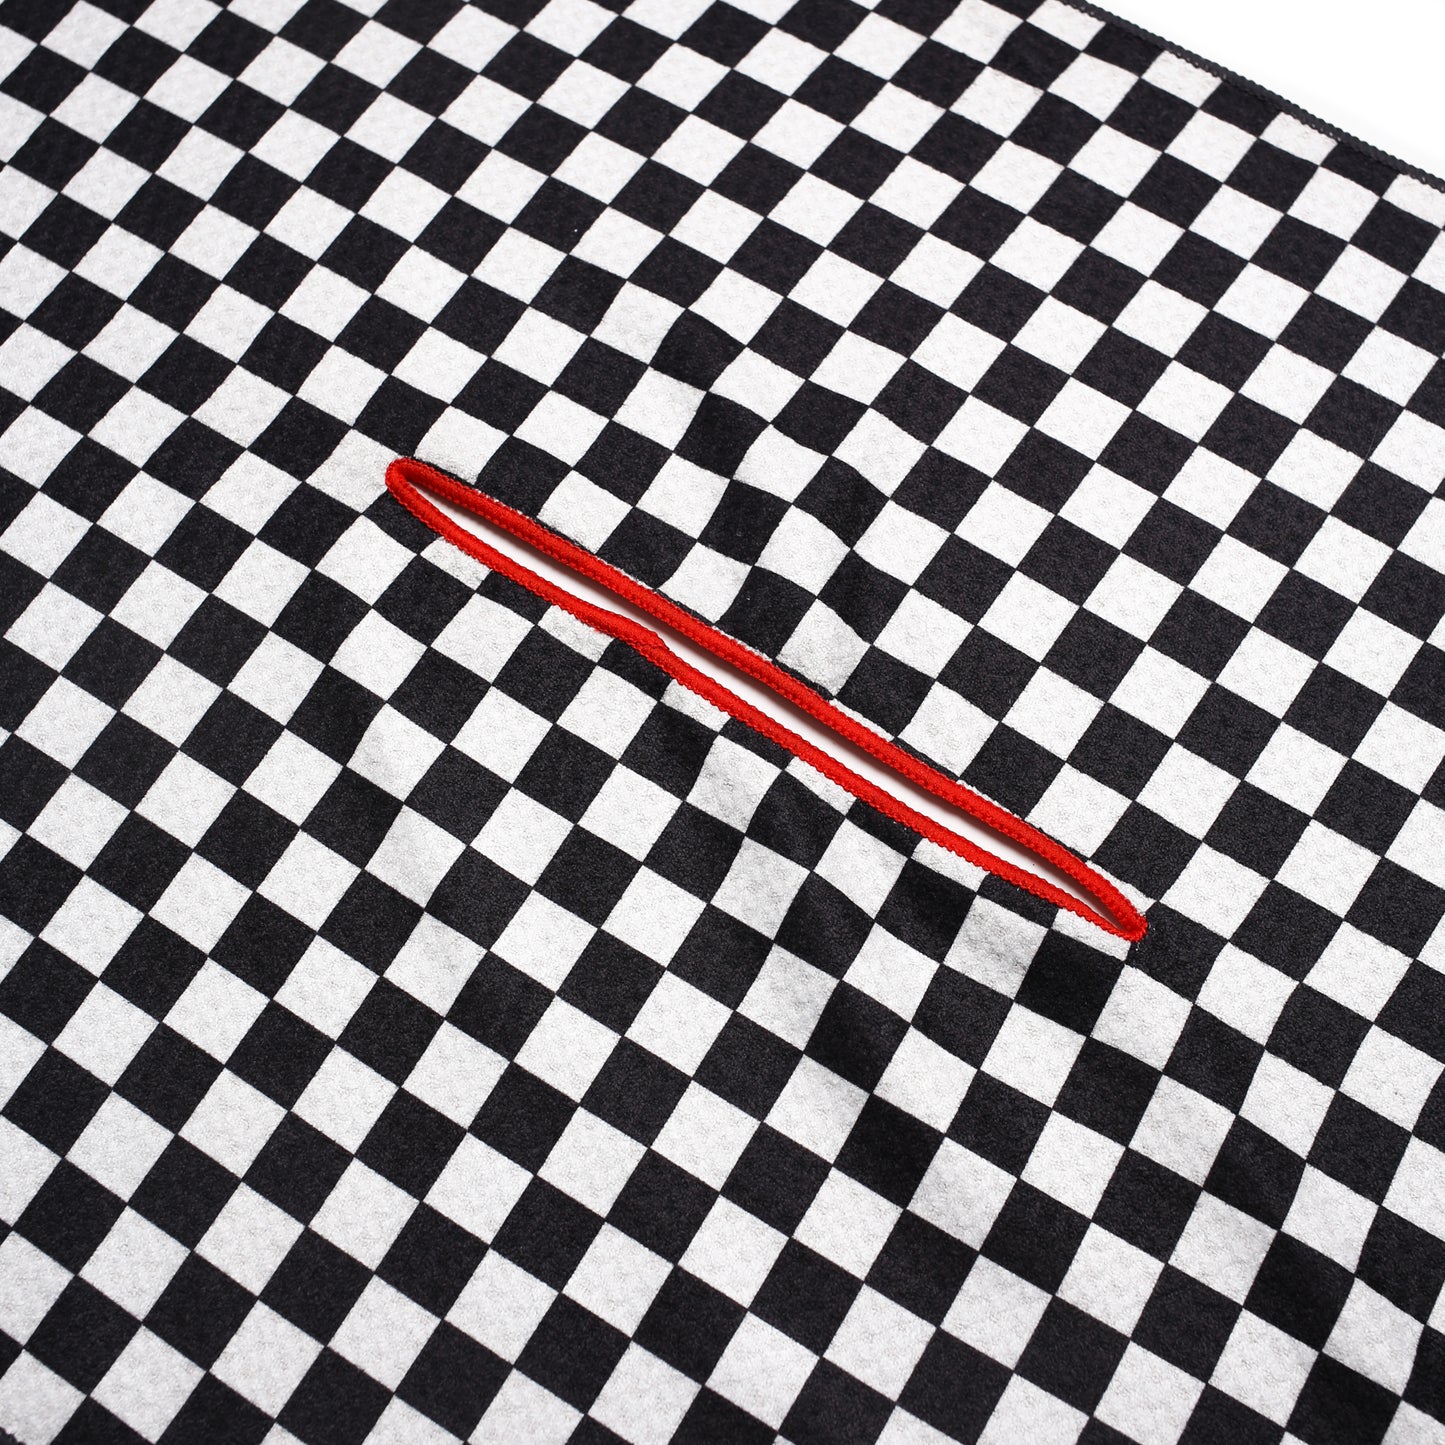 Black and White Checker PlayKleen Golf Towel